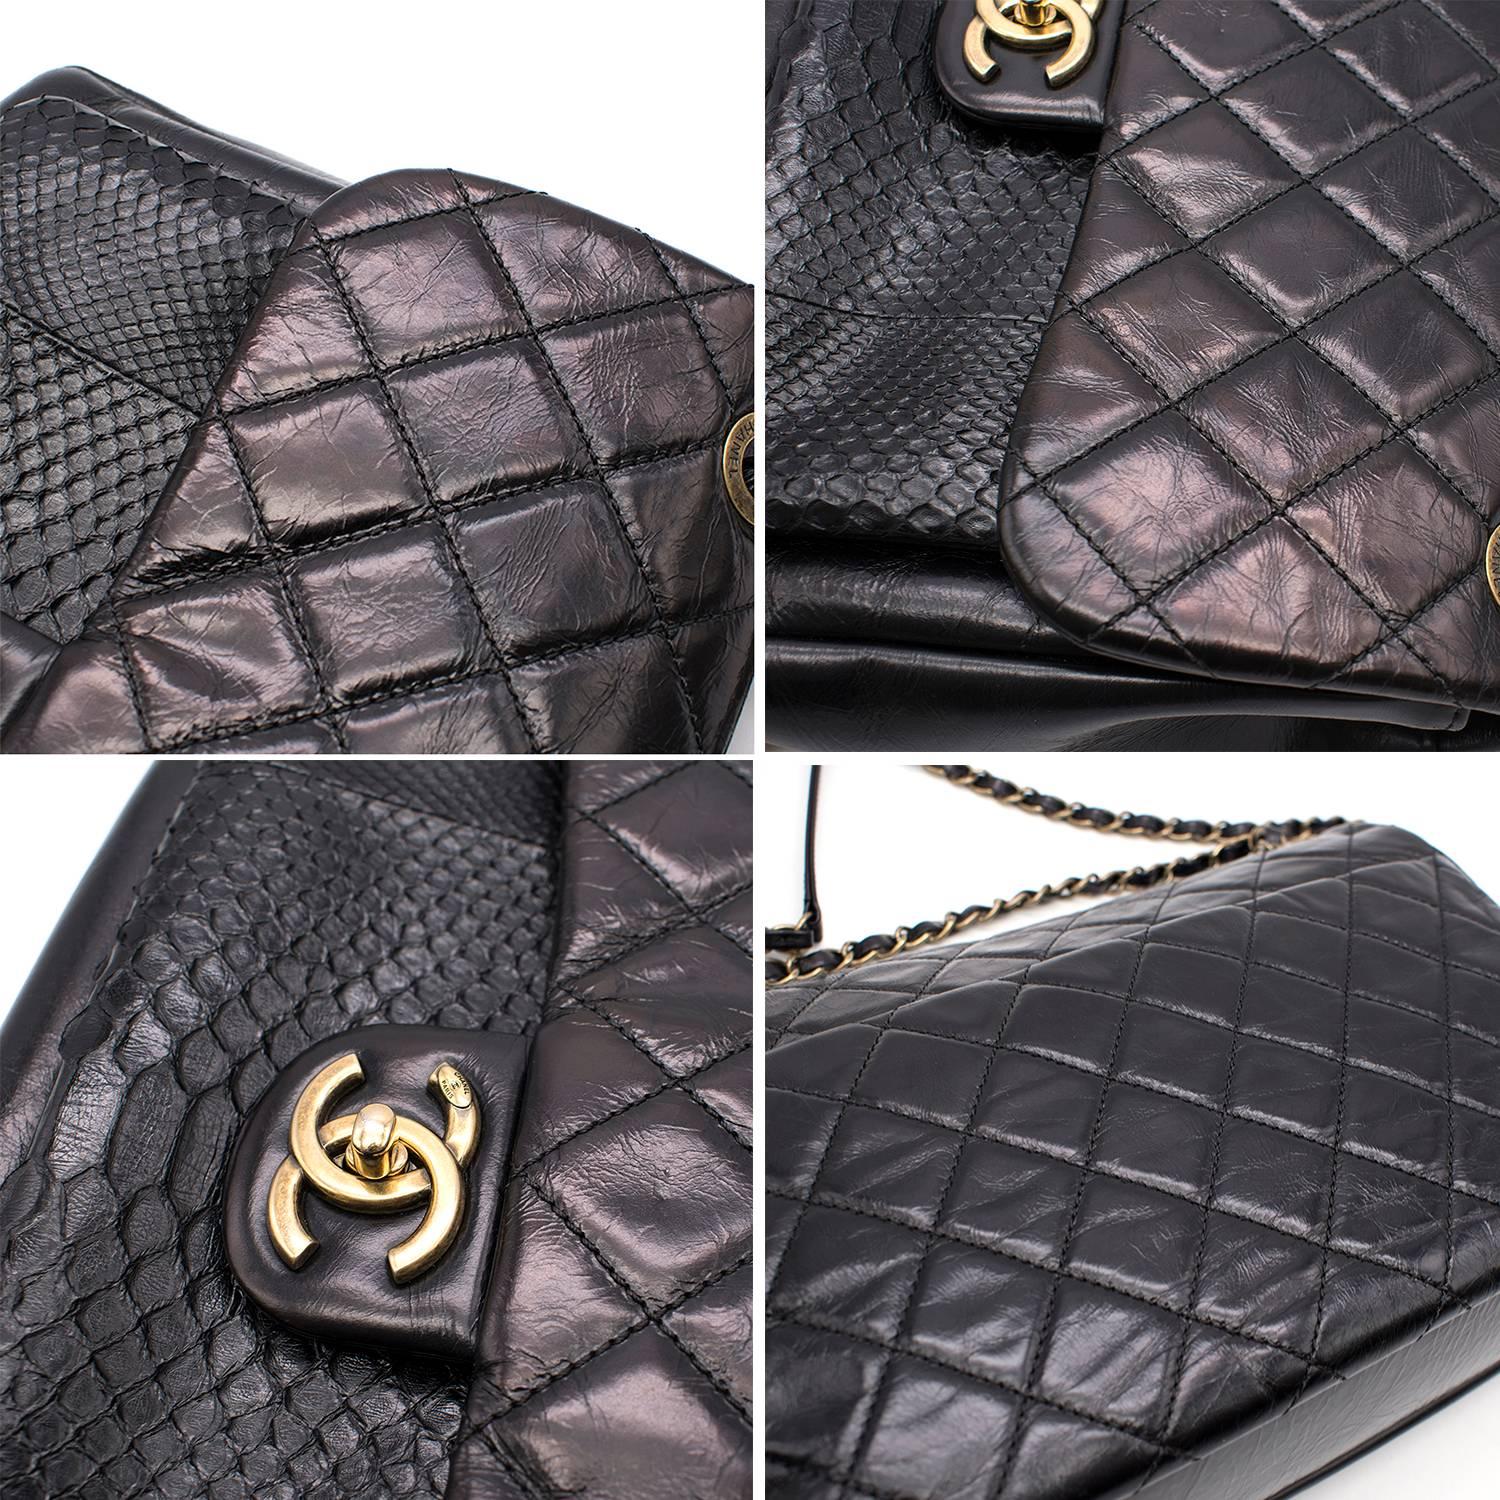 Chanel Black Classic Flap Bag with Snakeskin Exterior Pocket For Sale 3